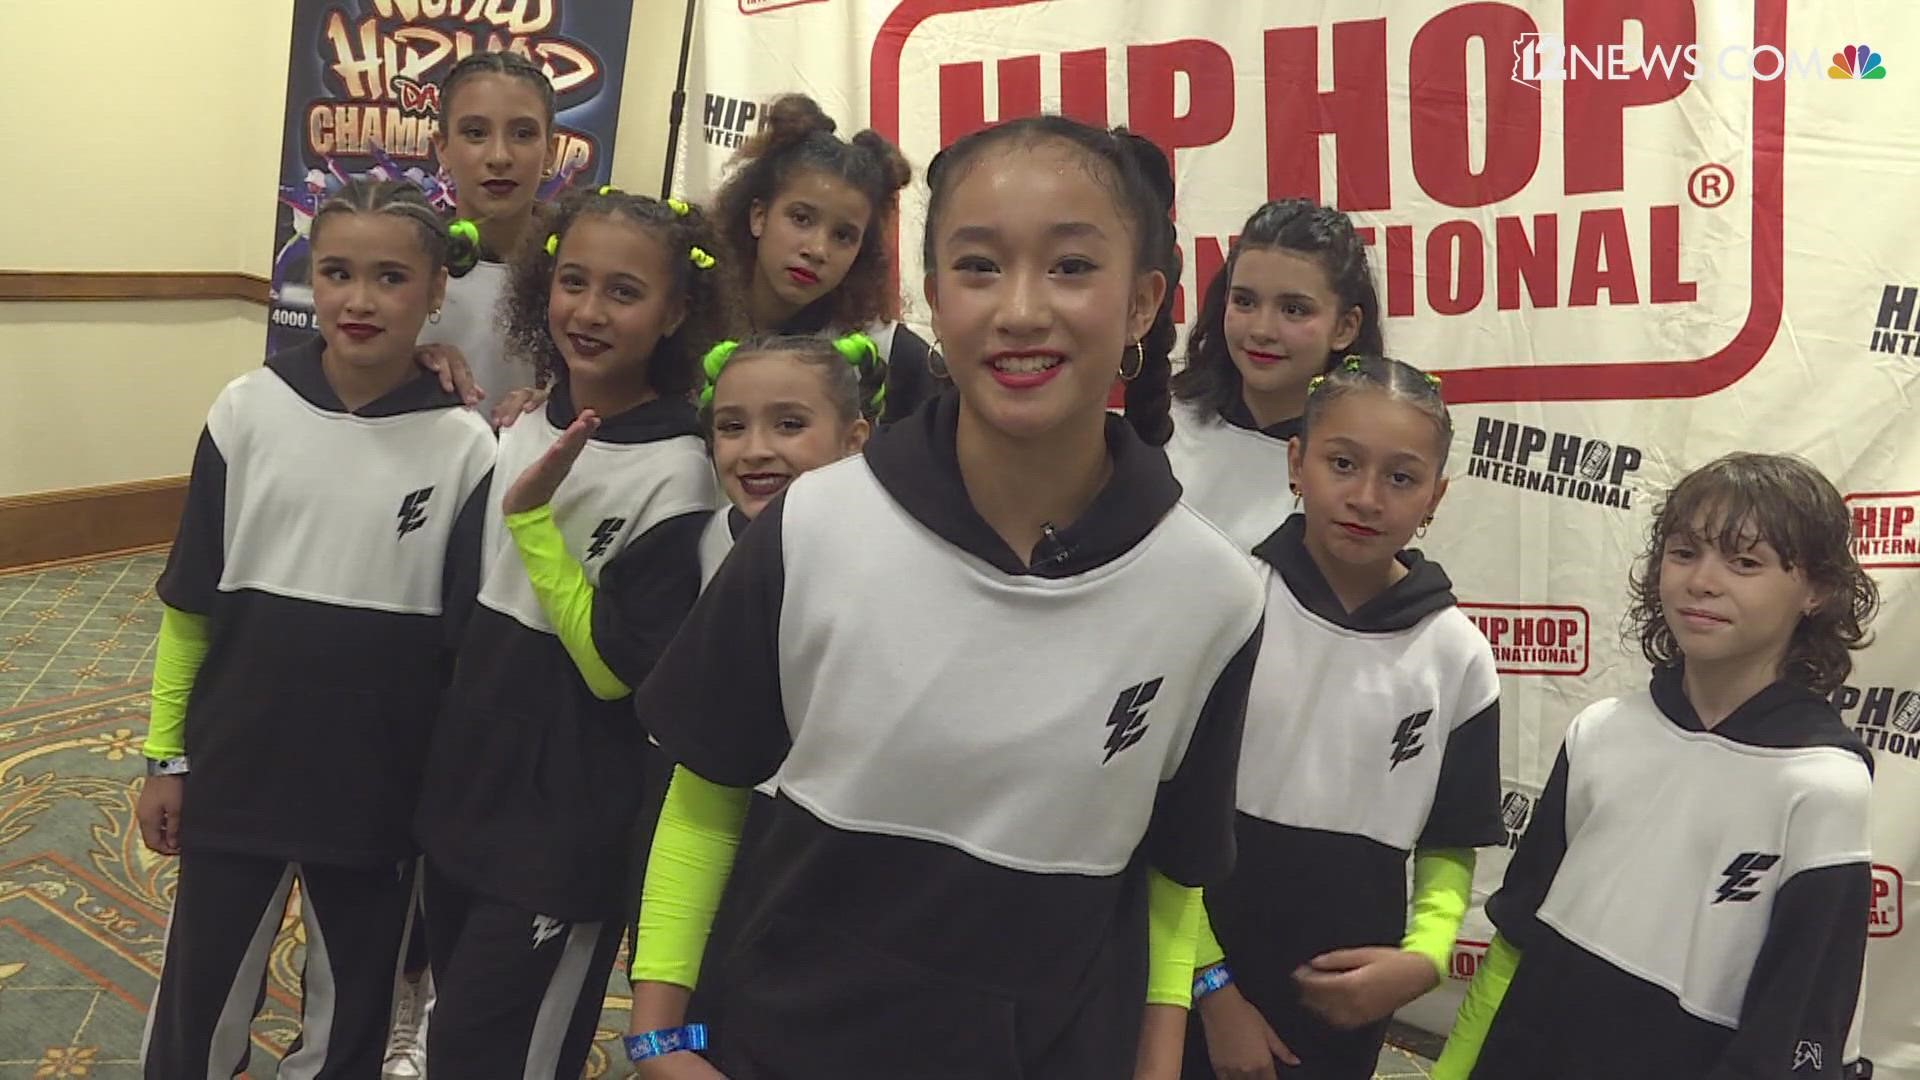 The Elektro Kids from Gilbert share their thoughts on what it's like to compete in the World Hip Hop Dance Championship.